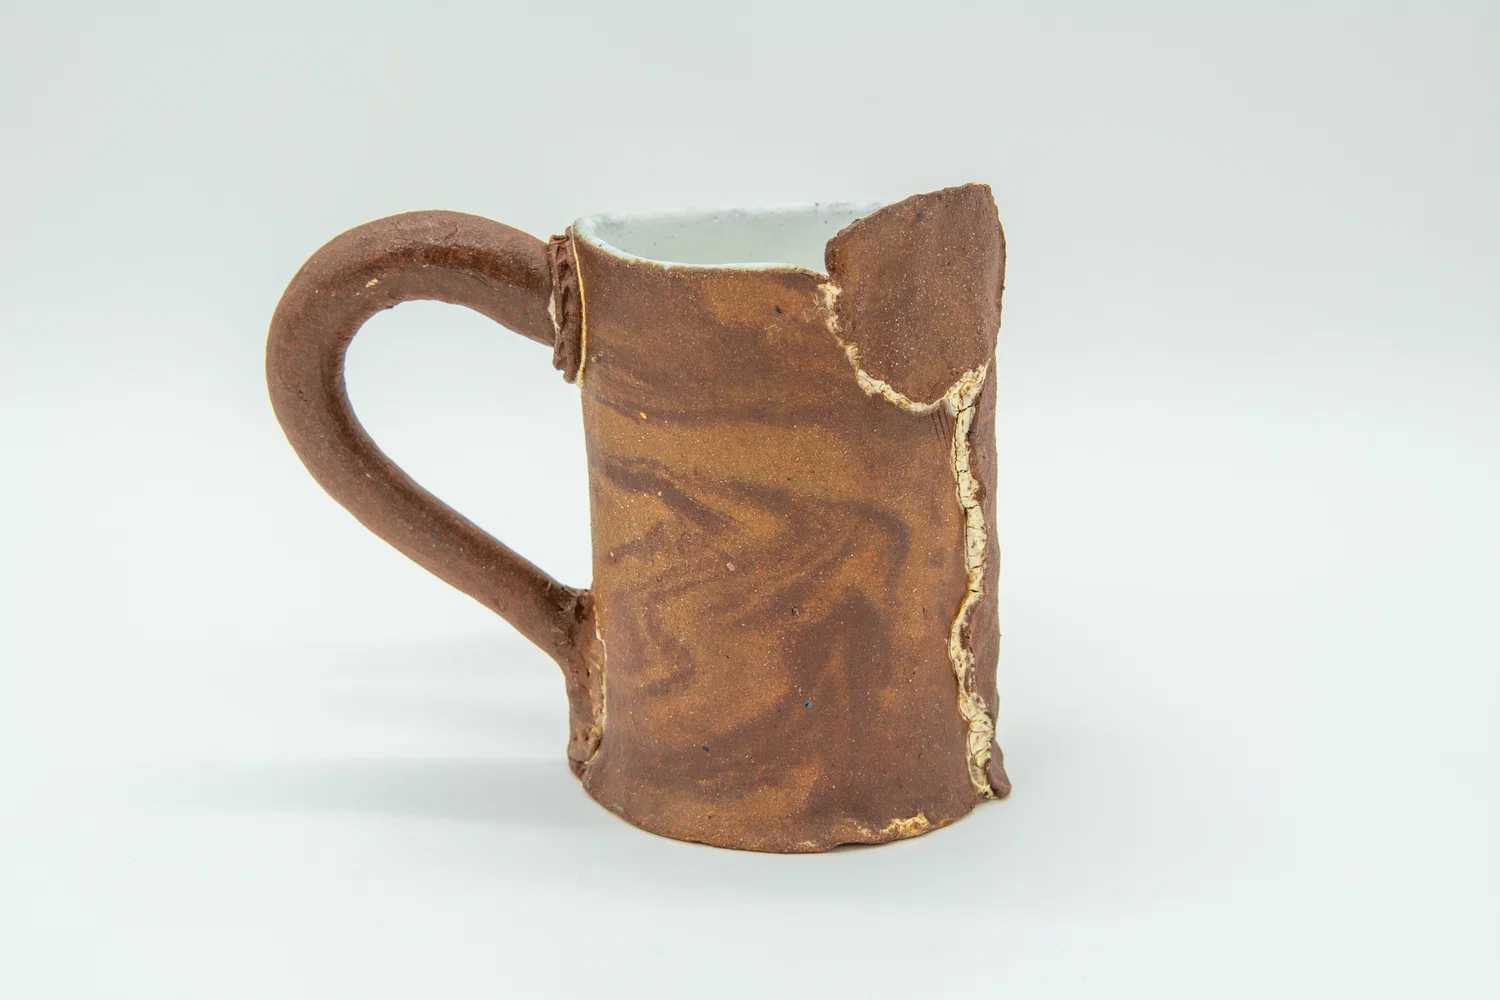 A handmade mug with an unglazed exterior, no effort was made to hide where the clay connects to itself. It leans slightly to the left towards the heavy handle. A red clay and a brown clay marble together while the seams of the mug are white with a third clay color, highlighting them.. The inside is glazed a matte white.